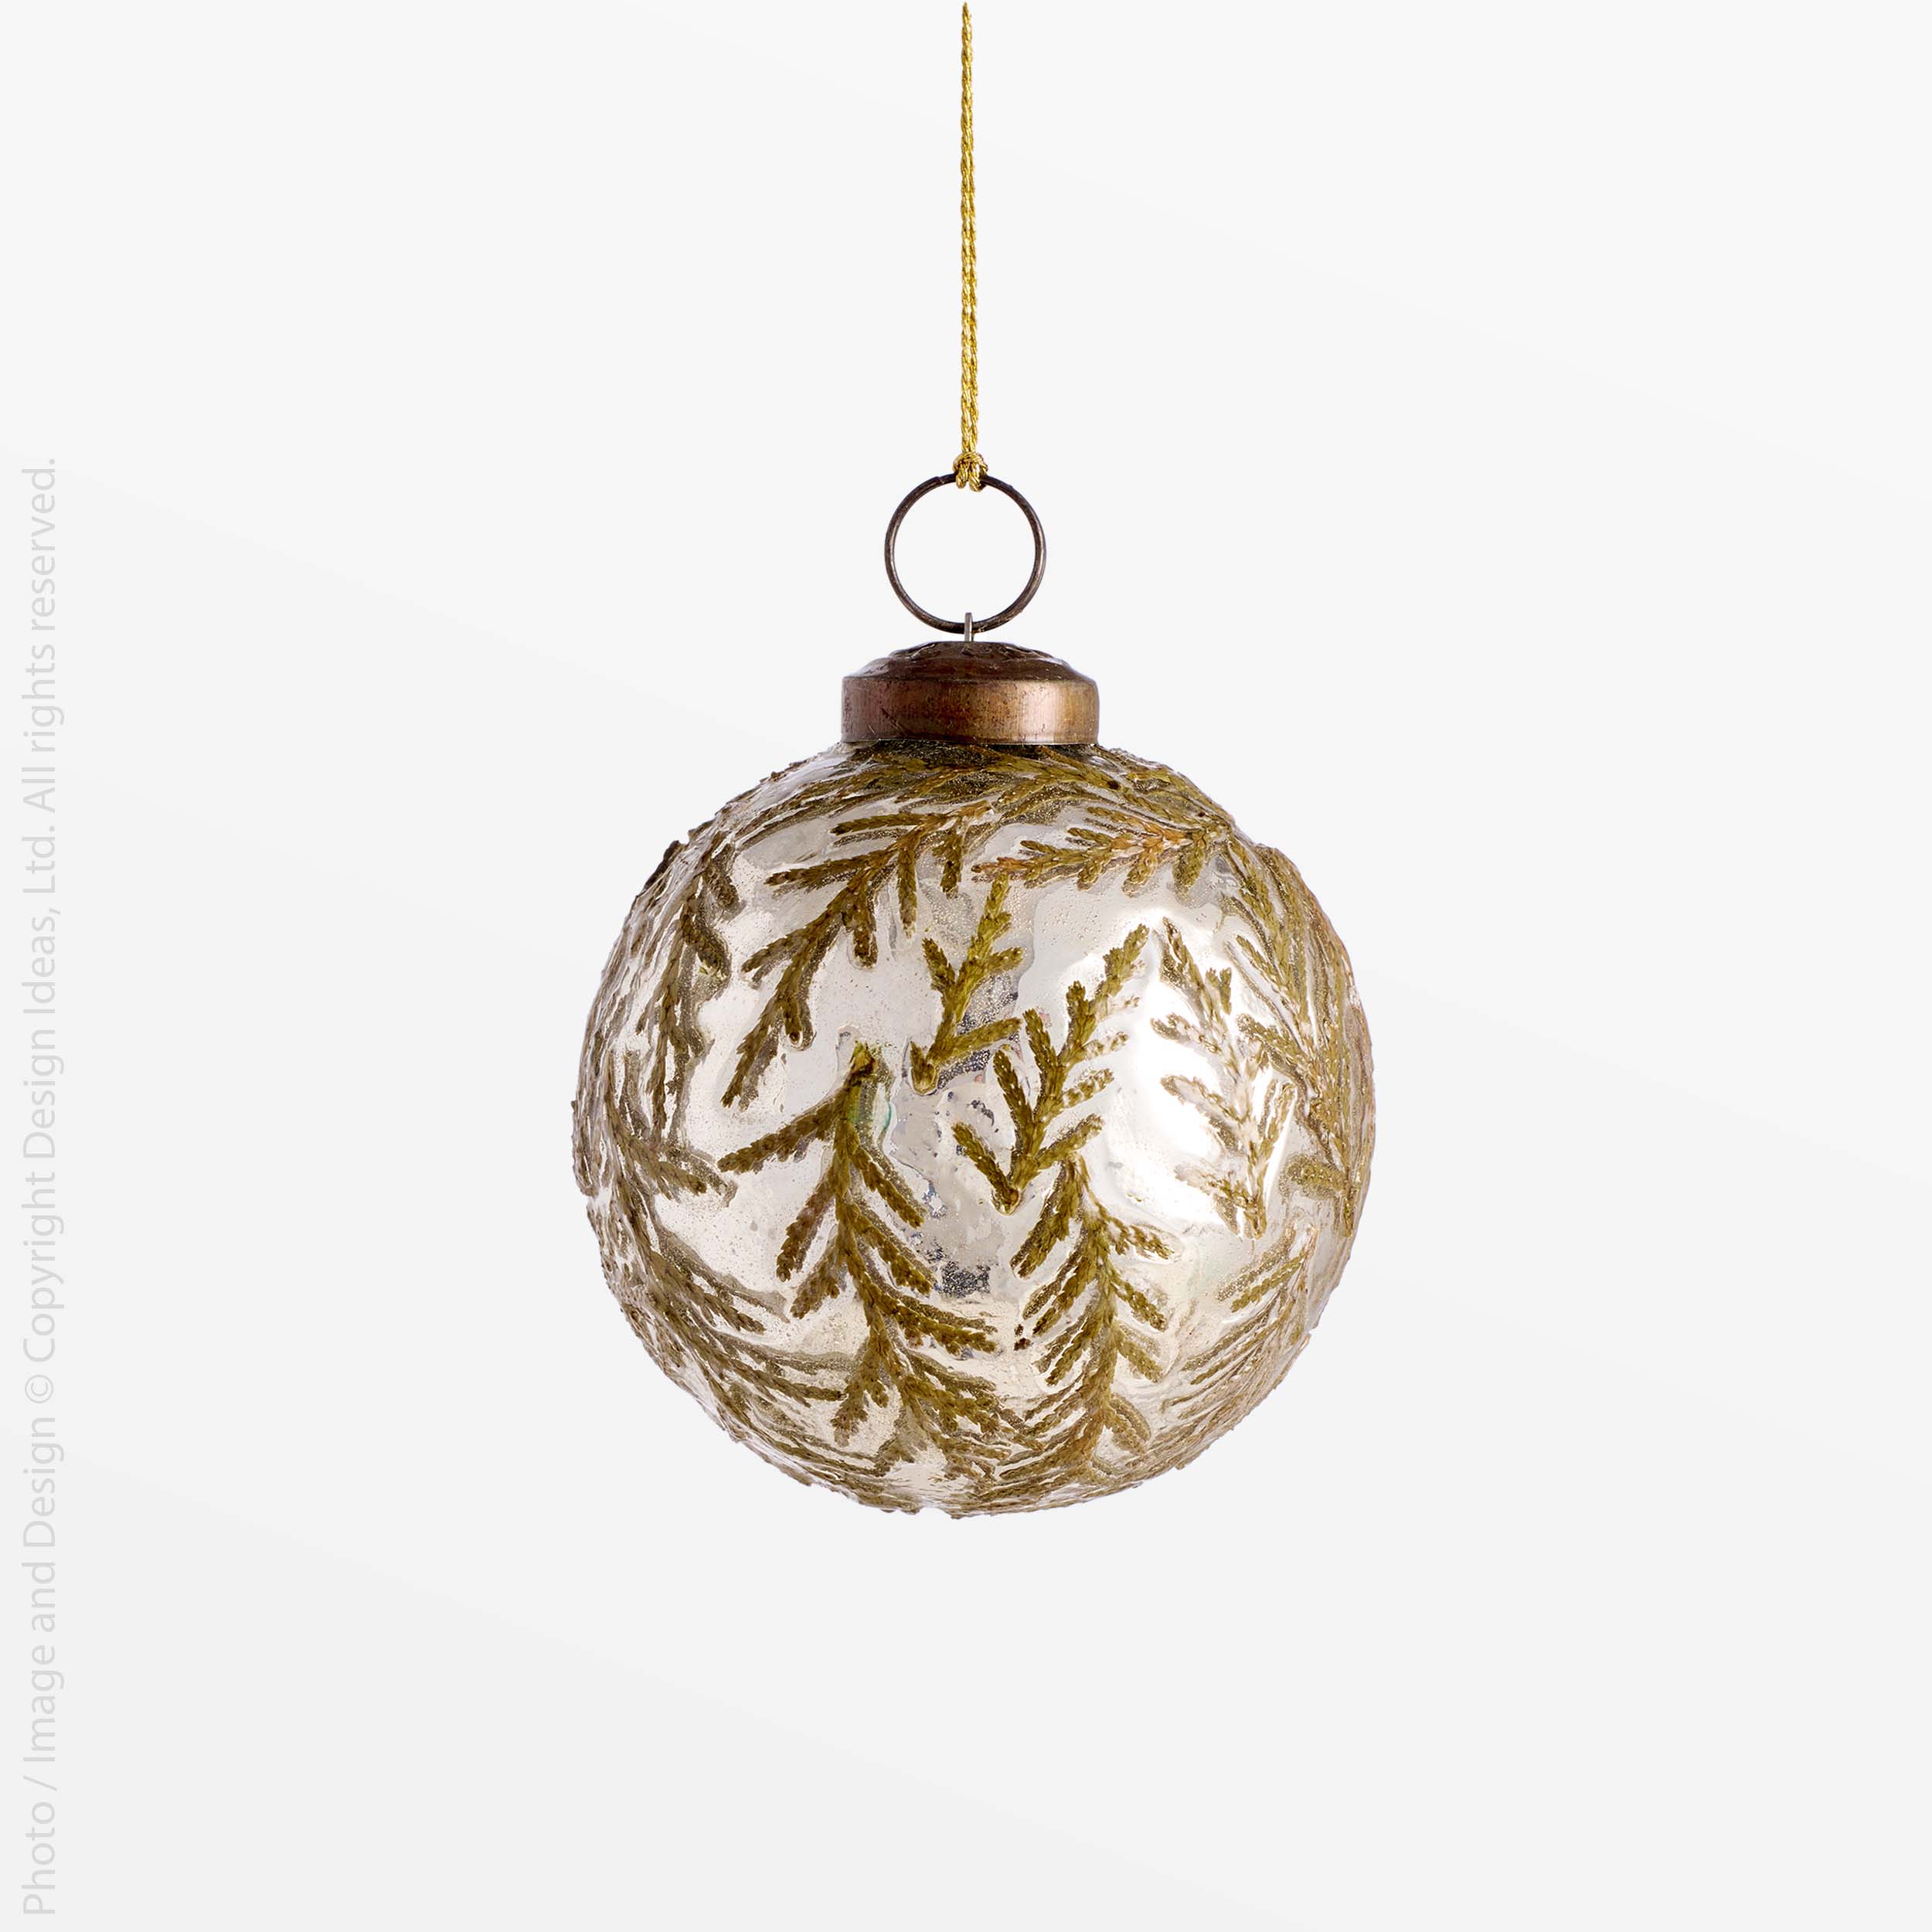 Balsam™ Mouth Blown Glass Ornament - 3 inch